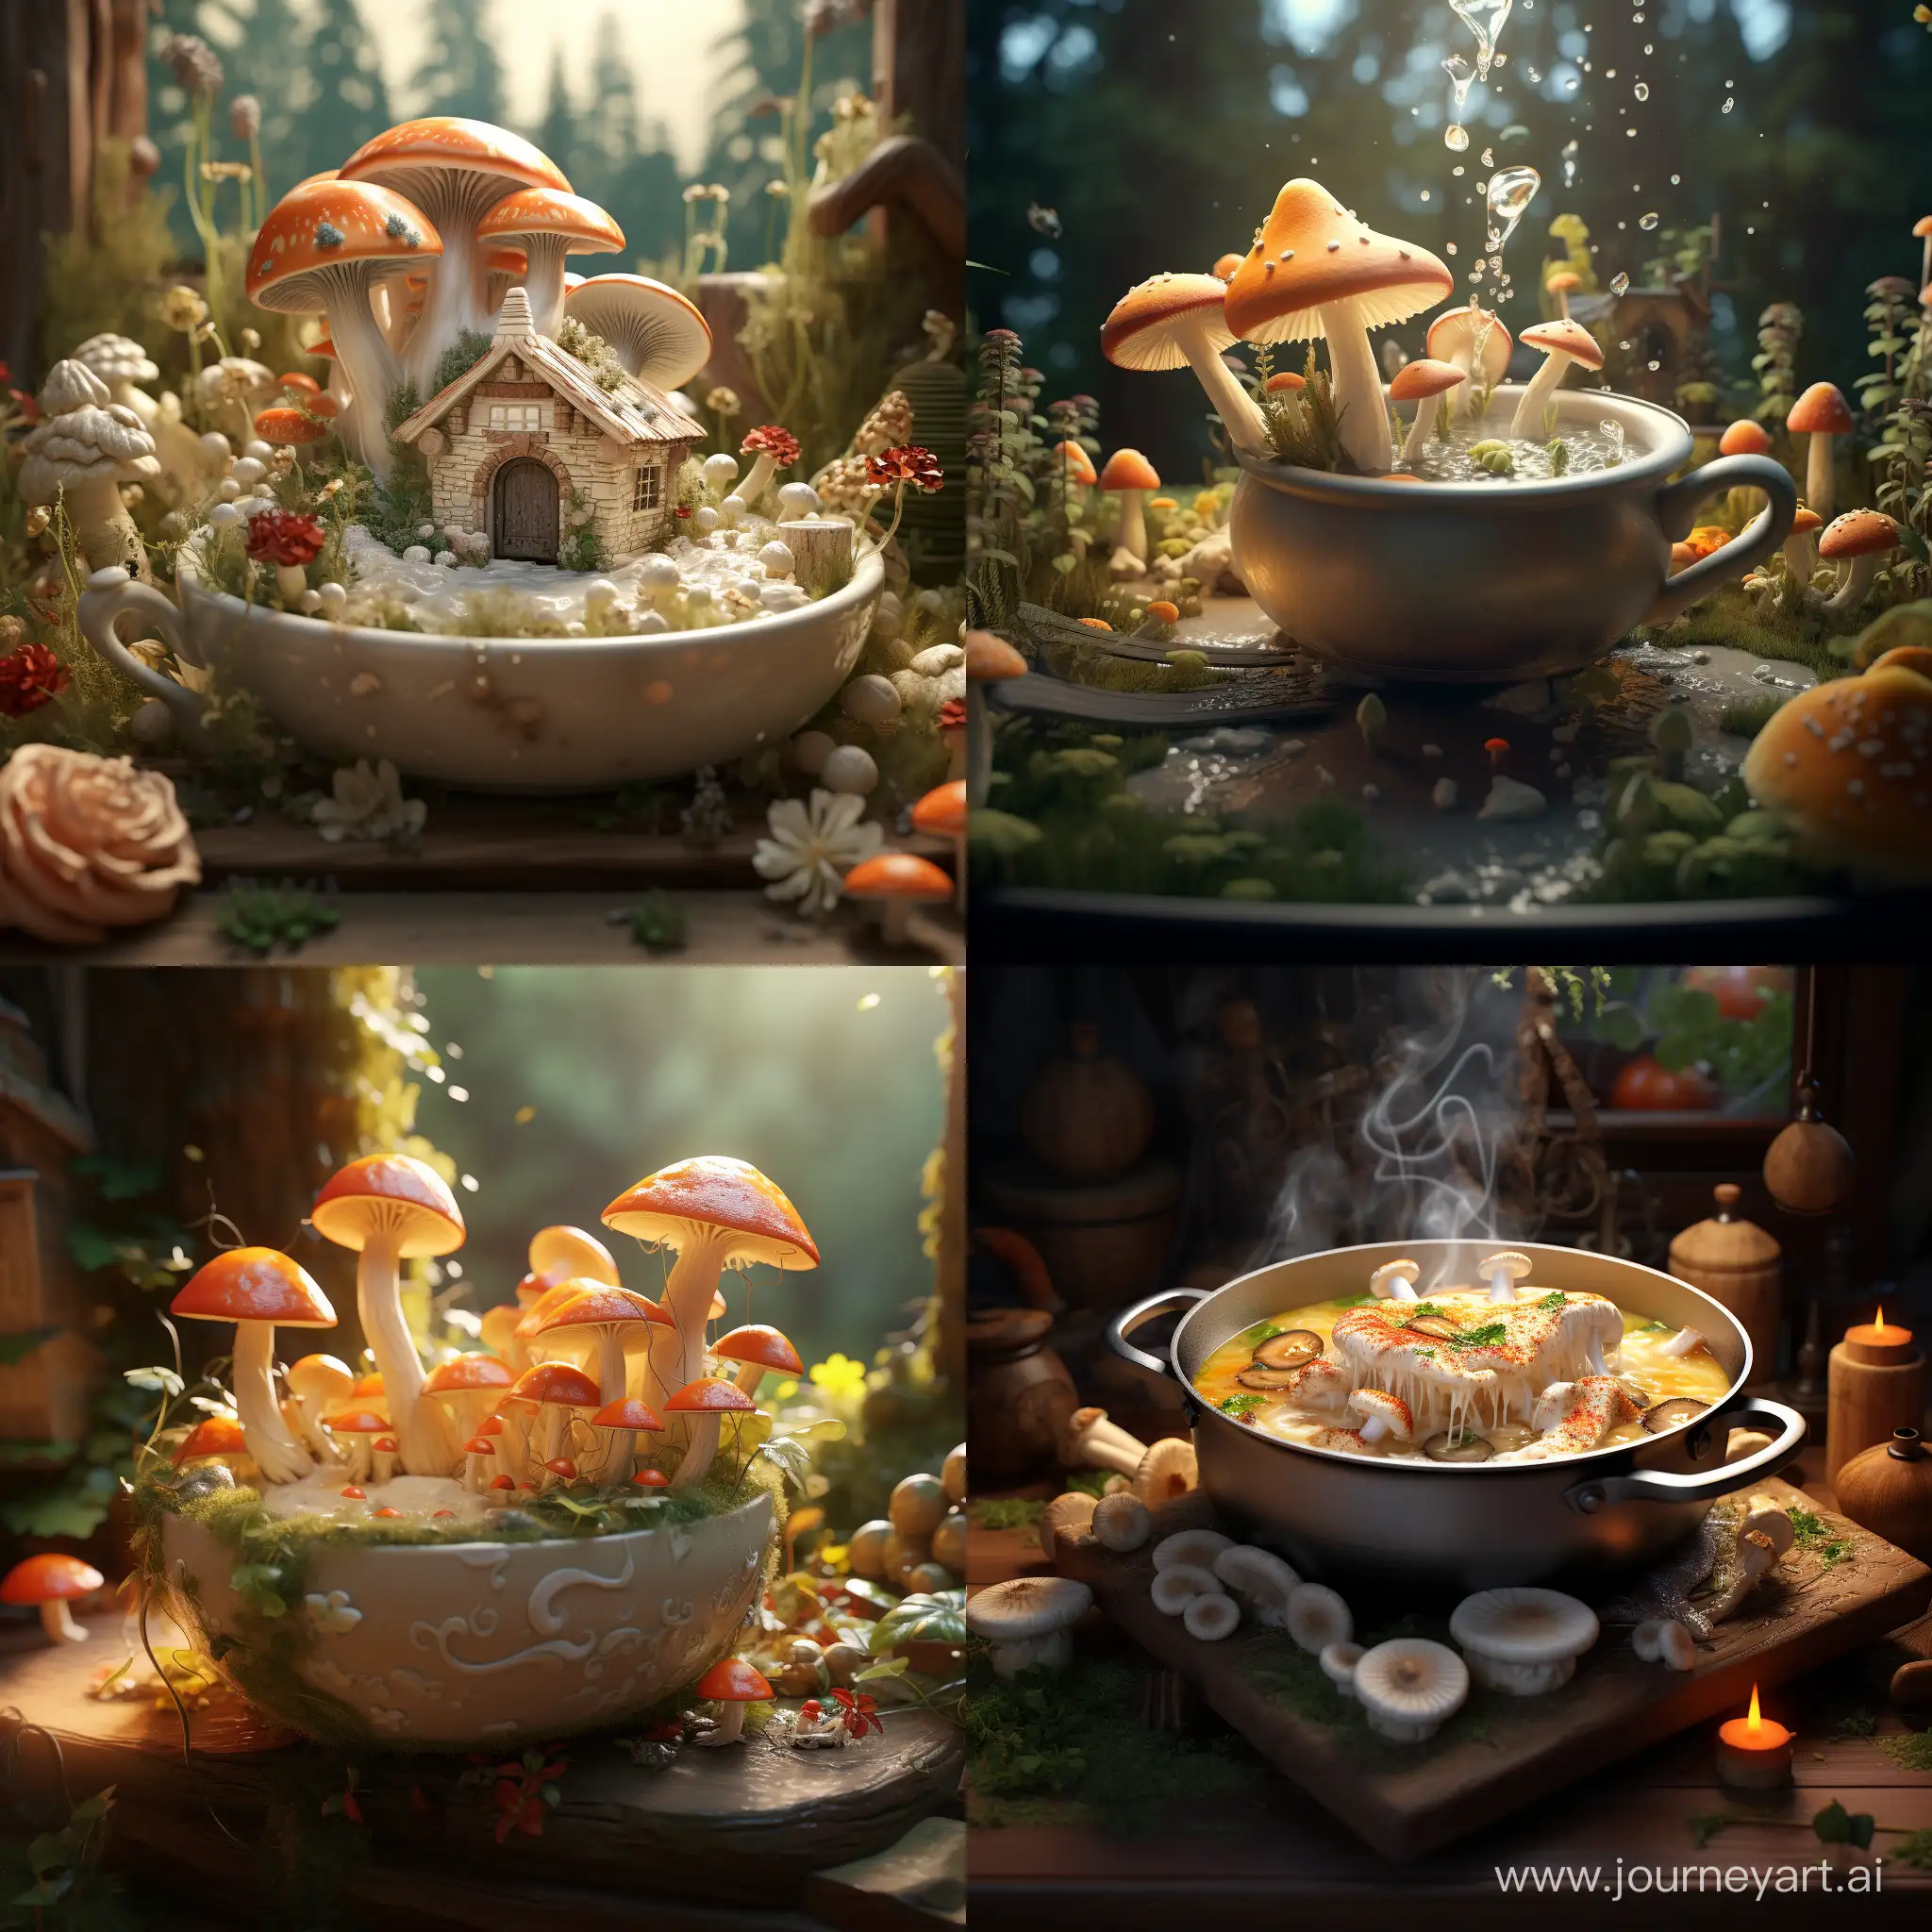 Savory-Champignon-Soup-A-Delectable-3D-Culinary-Animation